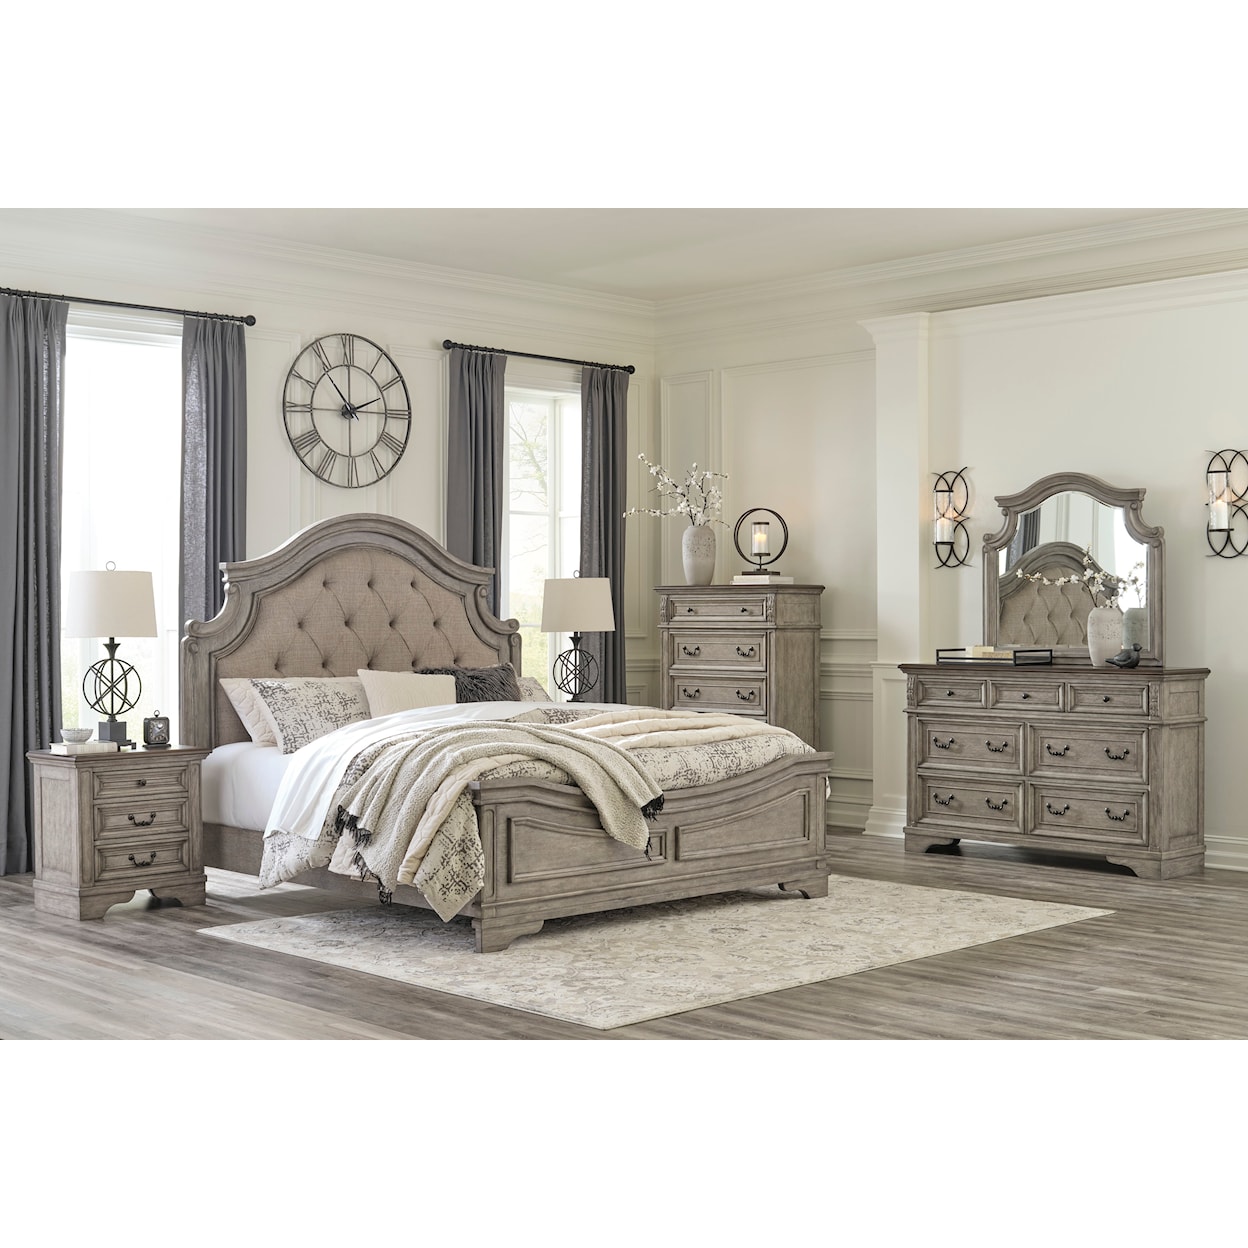 Signature Design by Ashley Lodenbay 6 Piece King Bedroom Set